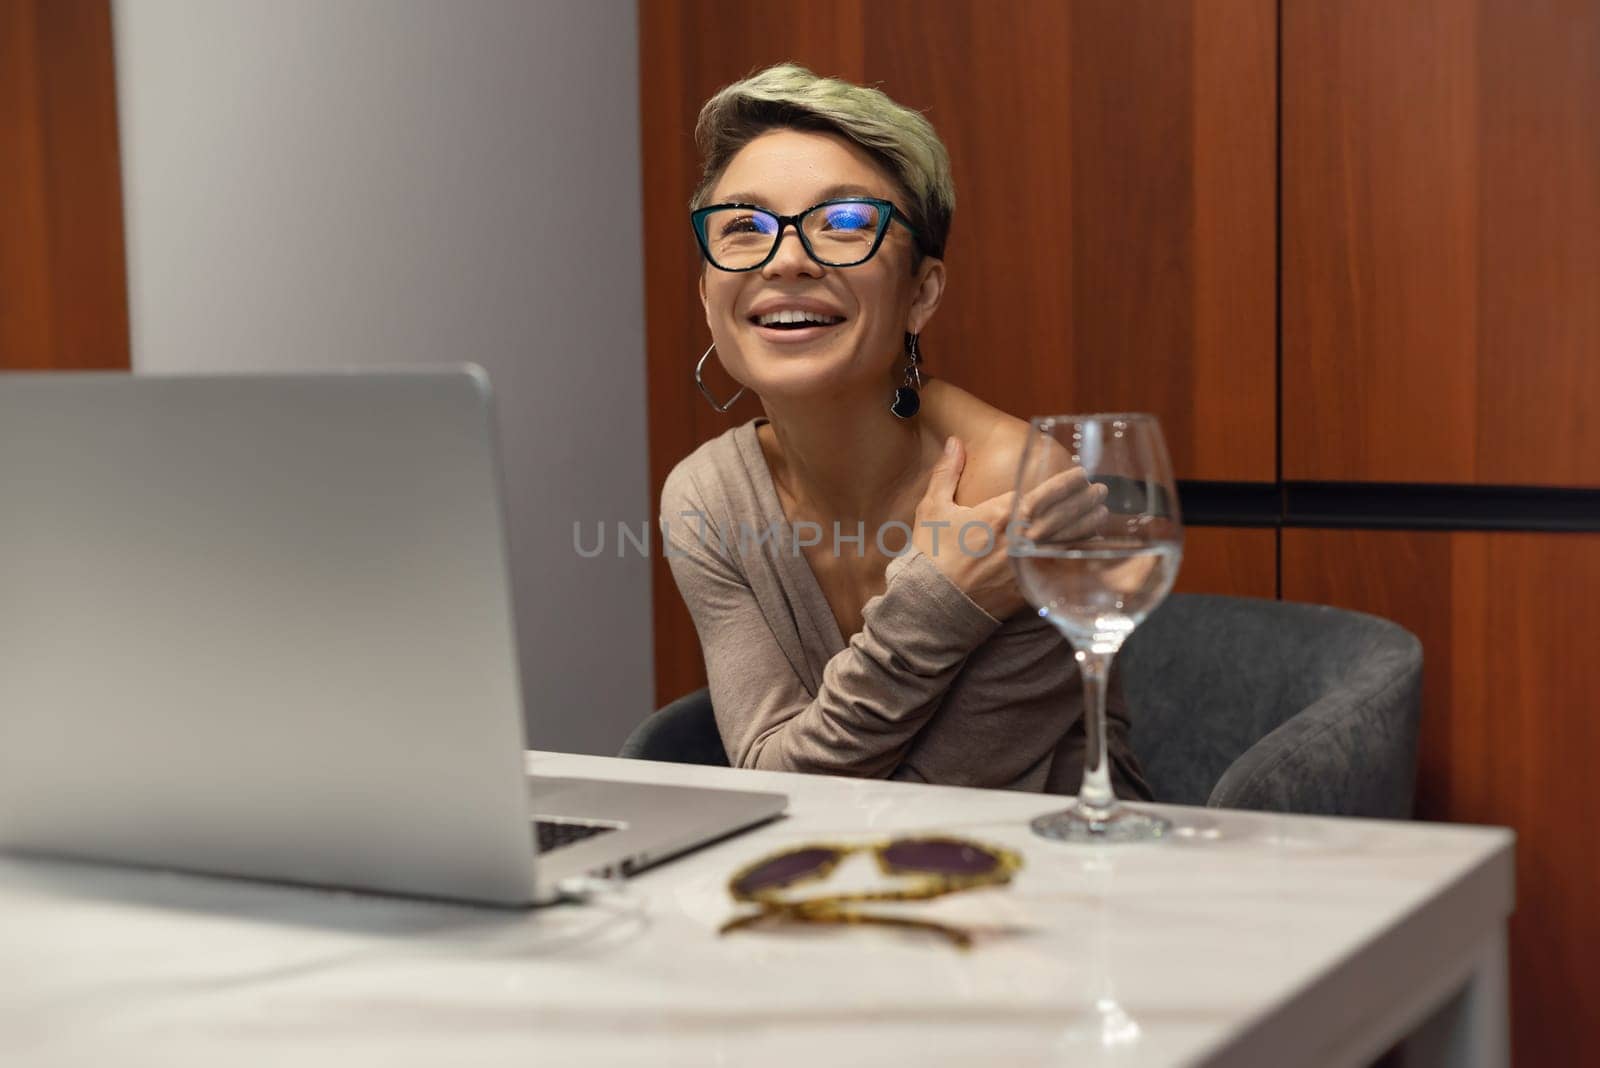 a girl with short hair and glasses indoors at a laptop laughs and smiles emotionally and cheerfully while working and chatting by Rotozey